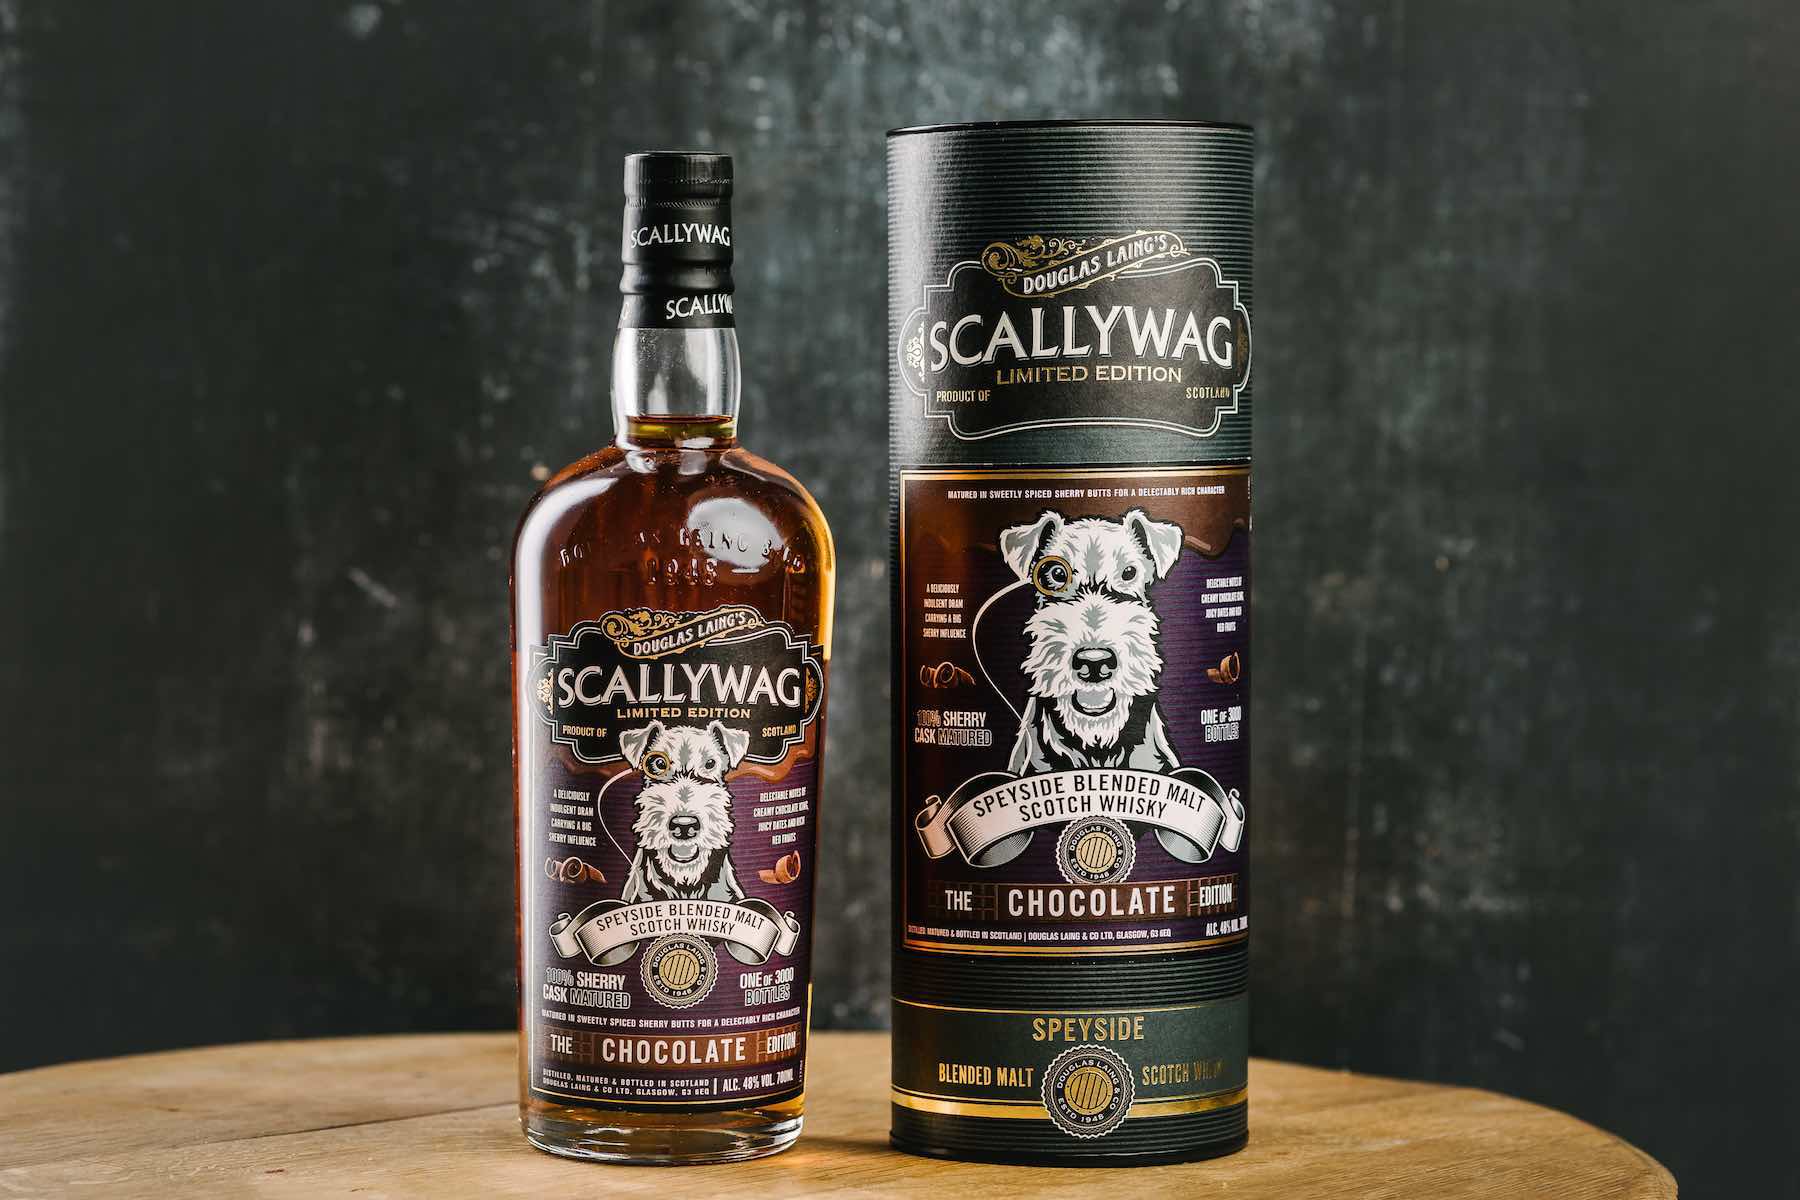 Independent bottler Douglas Laing have launched Scallywag Chocolate Limited Edition whisky to celebrate World Chocolate Day.